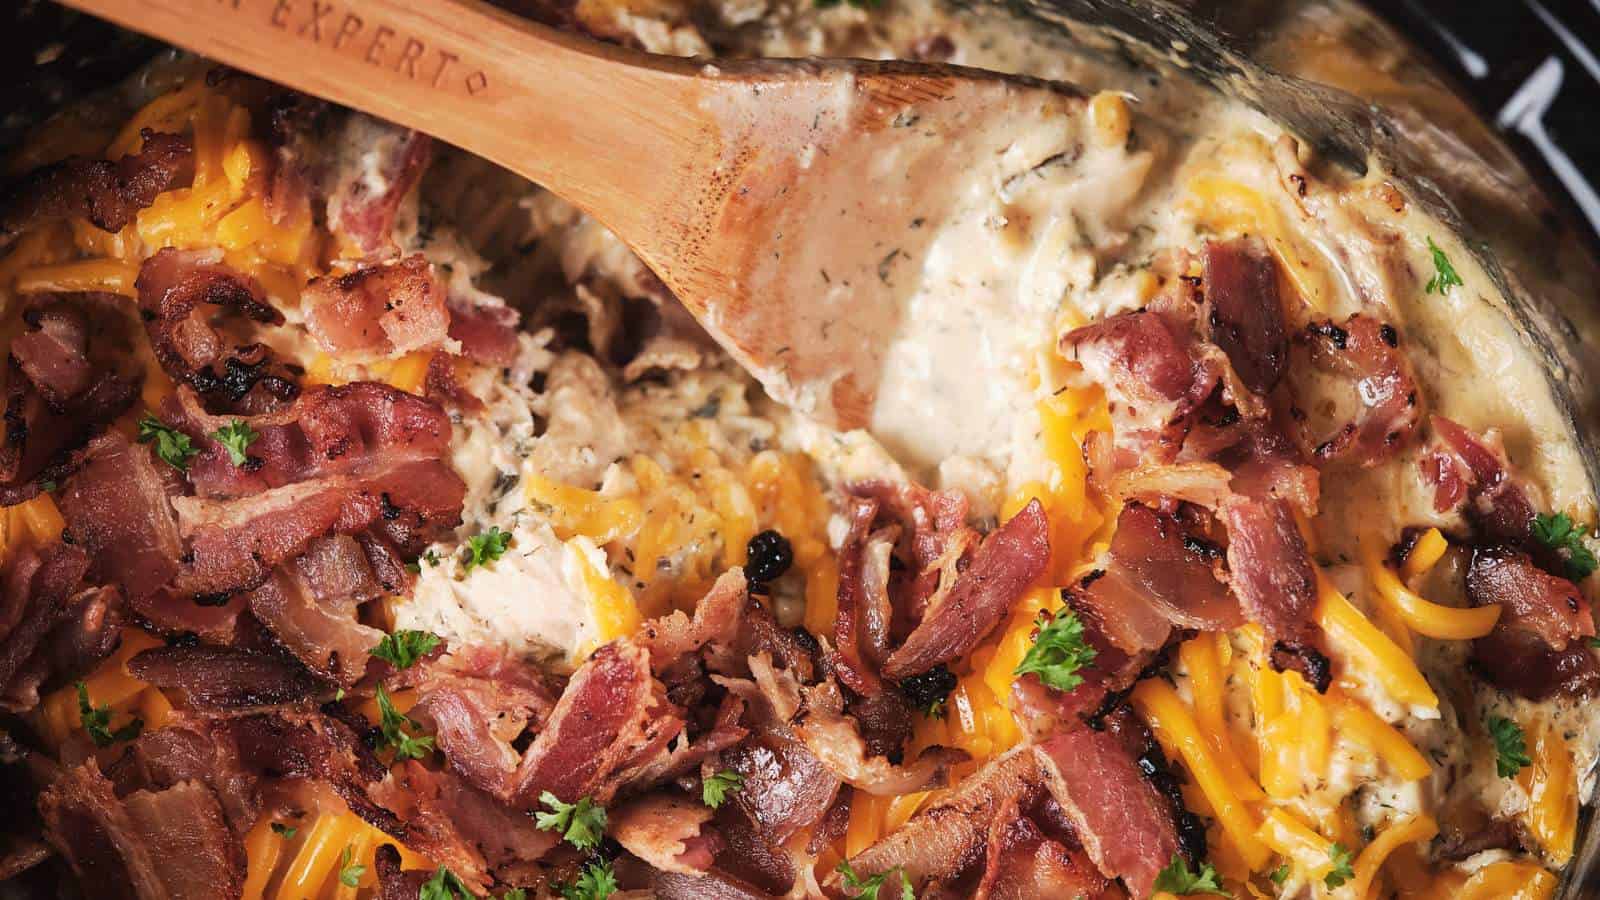 Creamy, cheesy chicken dish garnished with crispy bacon pieces and parsley, stirred with a wooden spoon.